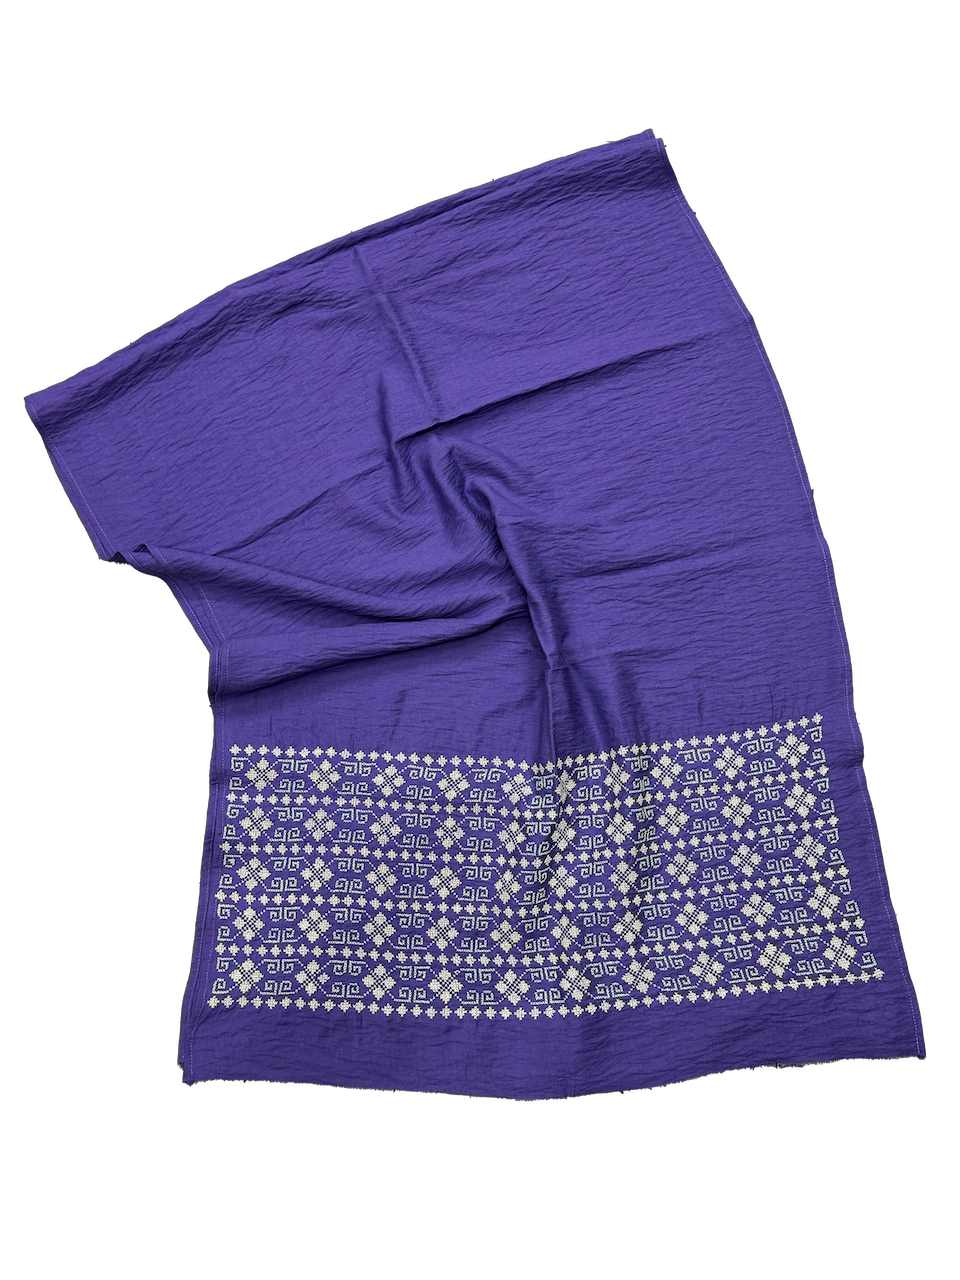 The Large Embroidered Scarf in Bright Purple